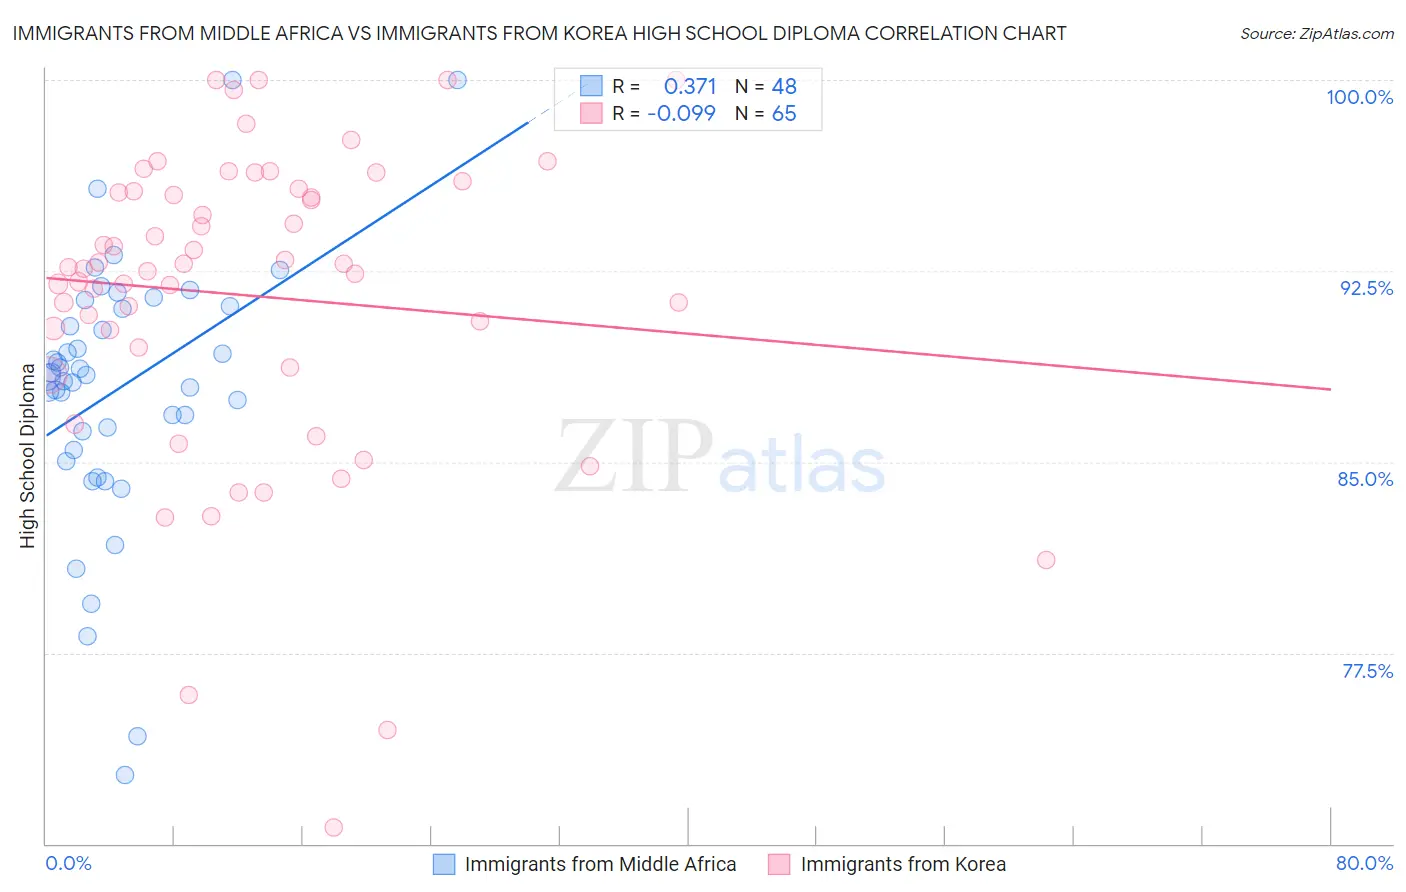 Immigrants from Middle Africa vs Immigrants from Korea High School Diploma